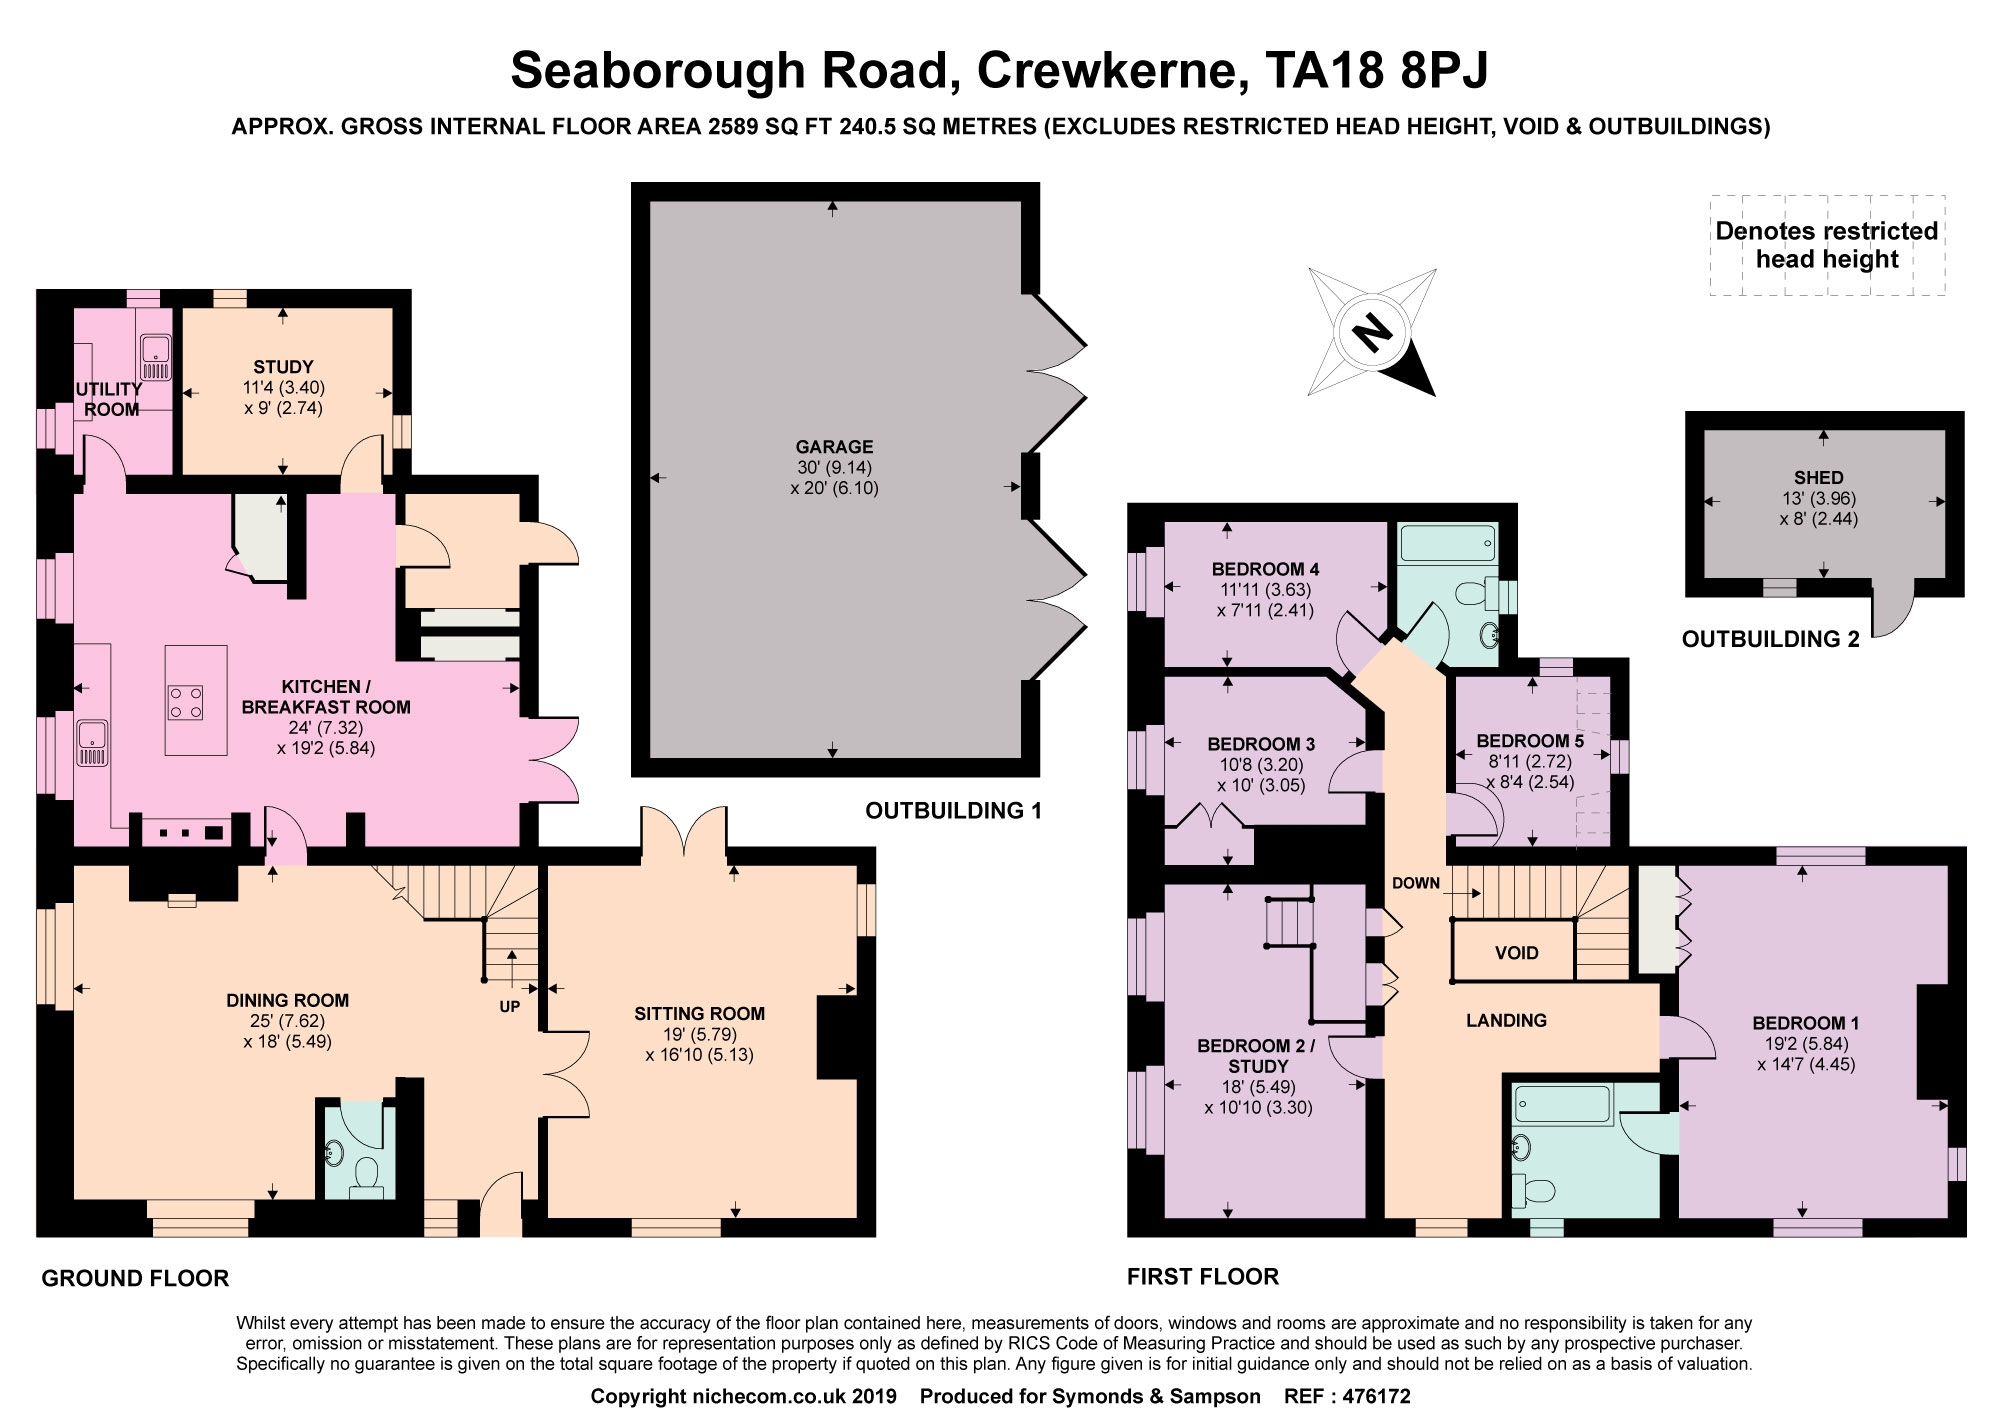 5 Bedrooms Detached house for sale in Seaborough Road, Crewkerne, Somerset TA18